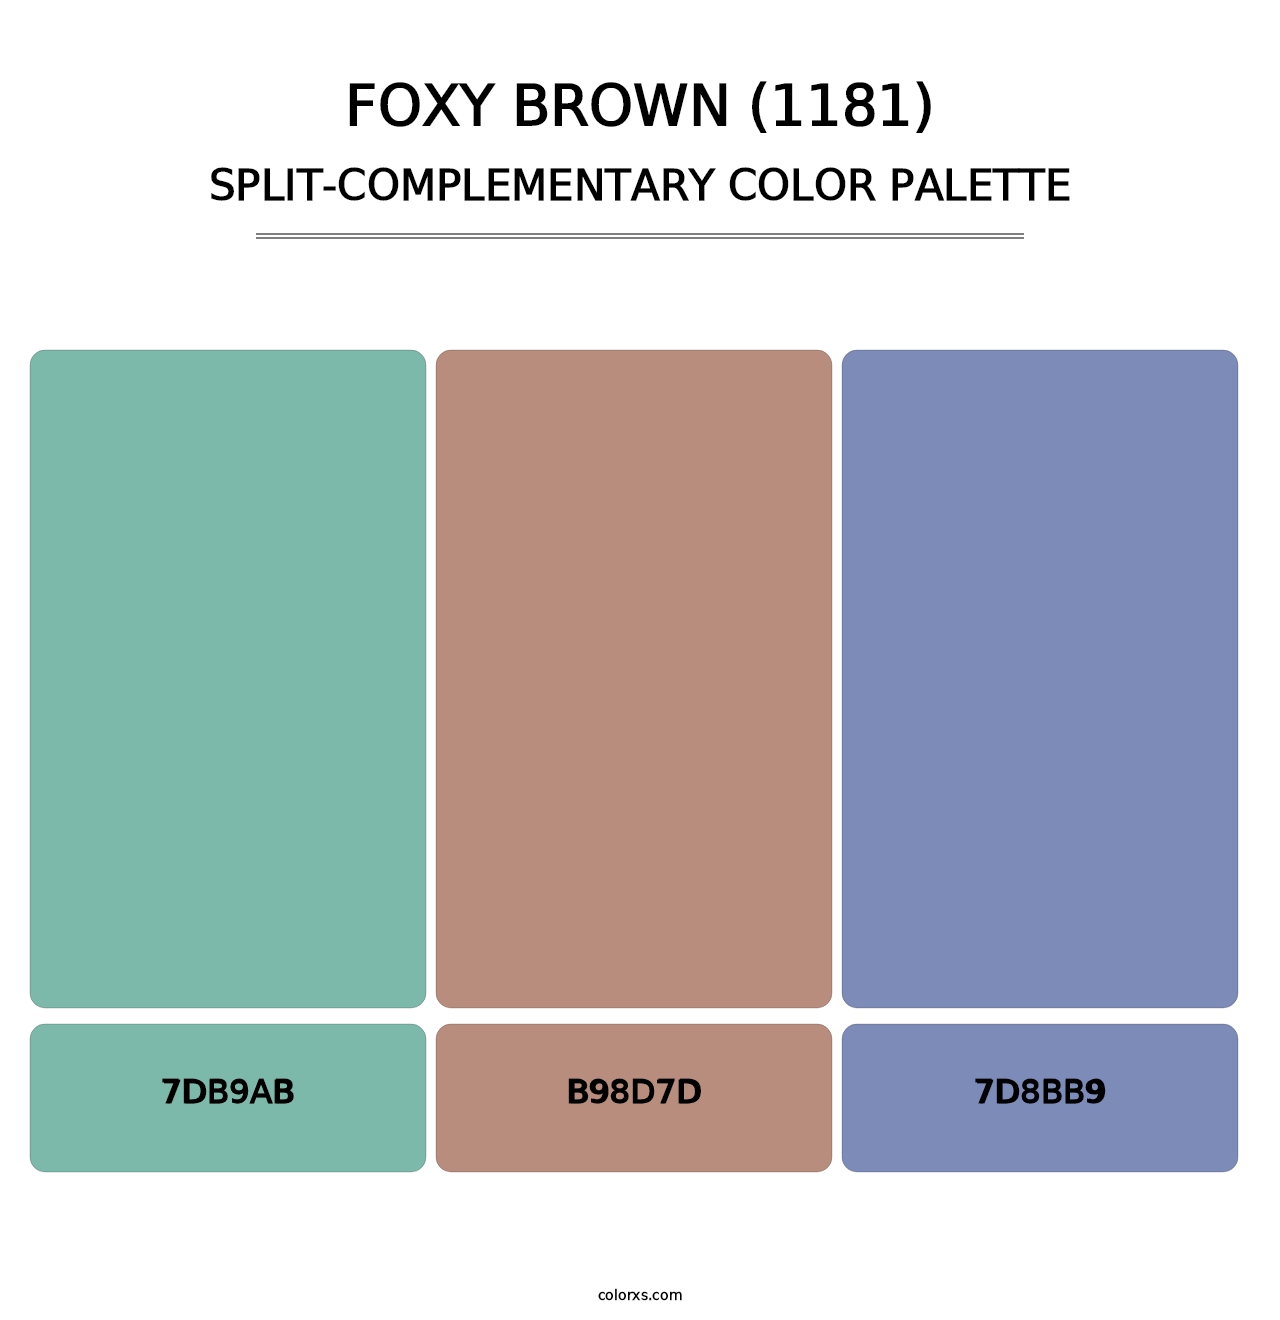 Foxy Brown (1181) - Split-Complementary Color Palette